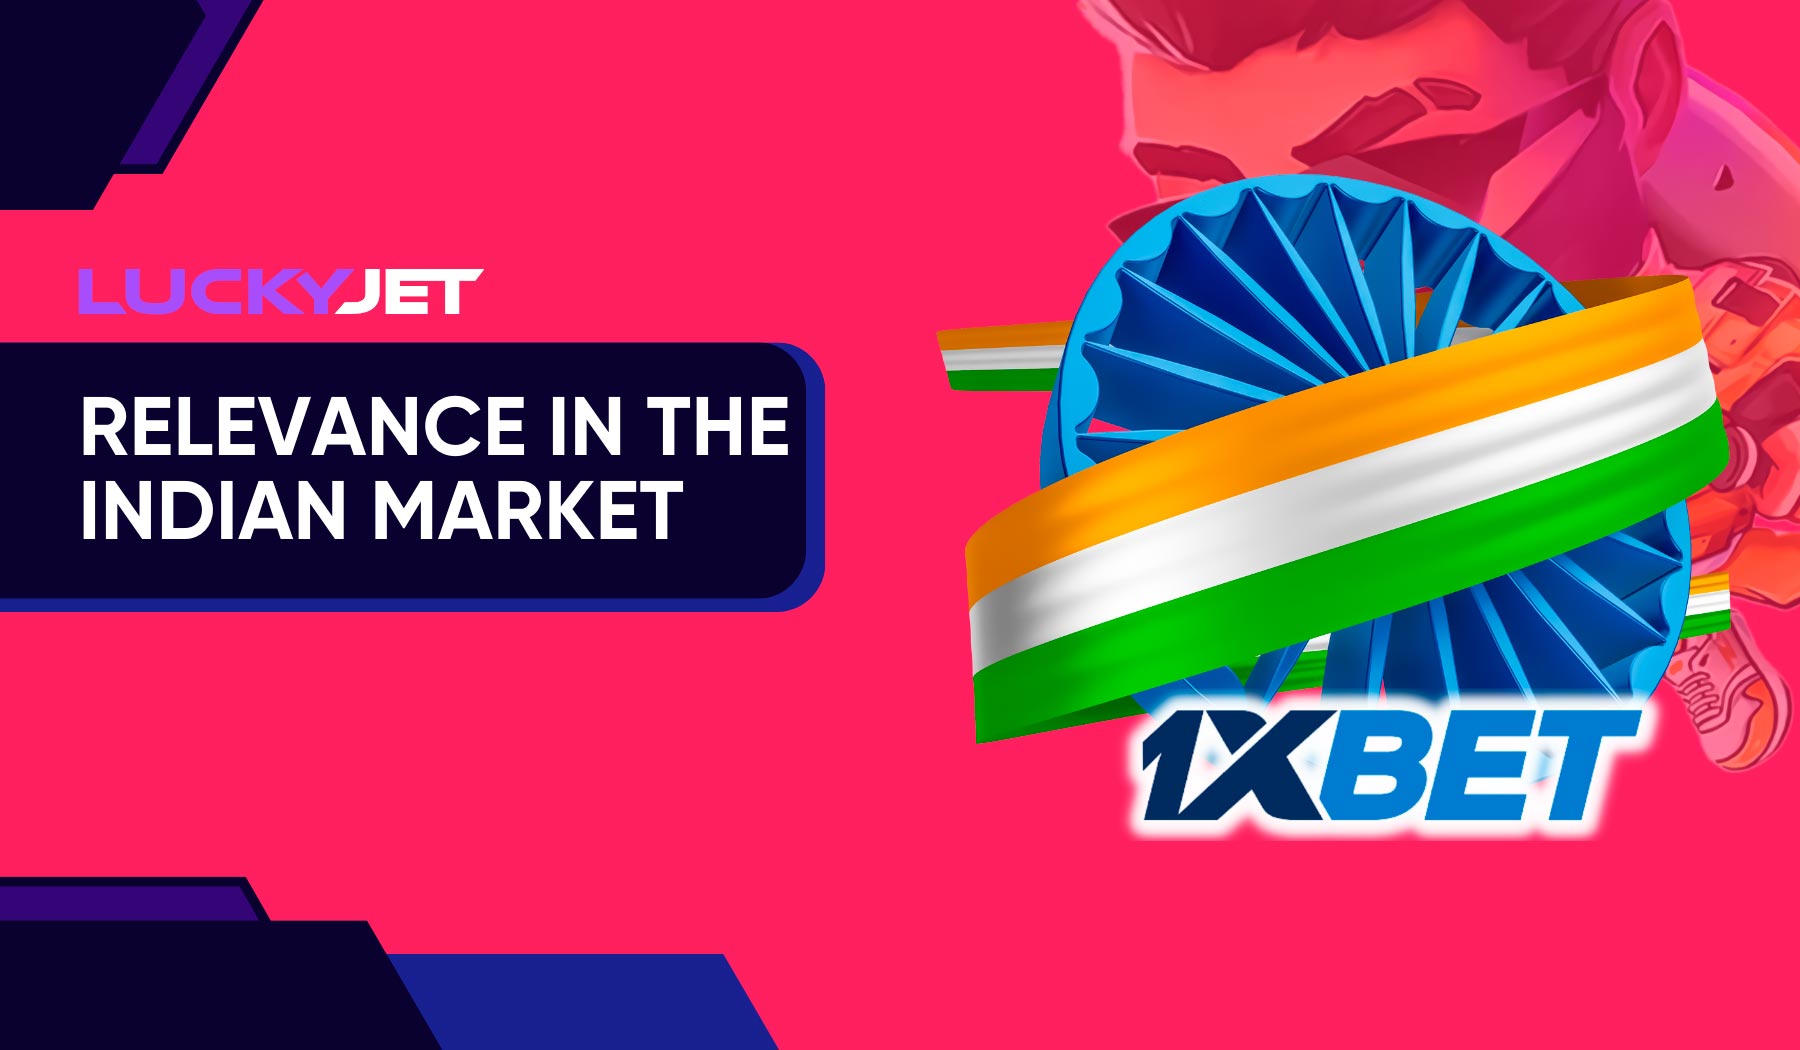 1xbet has launched the Lucky Jet game specifically for the Indian market